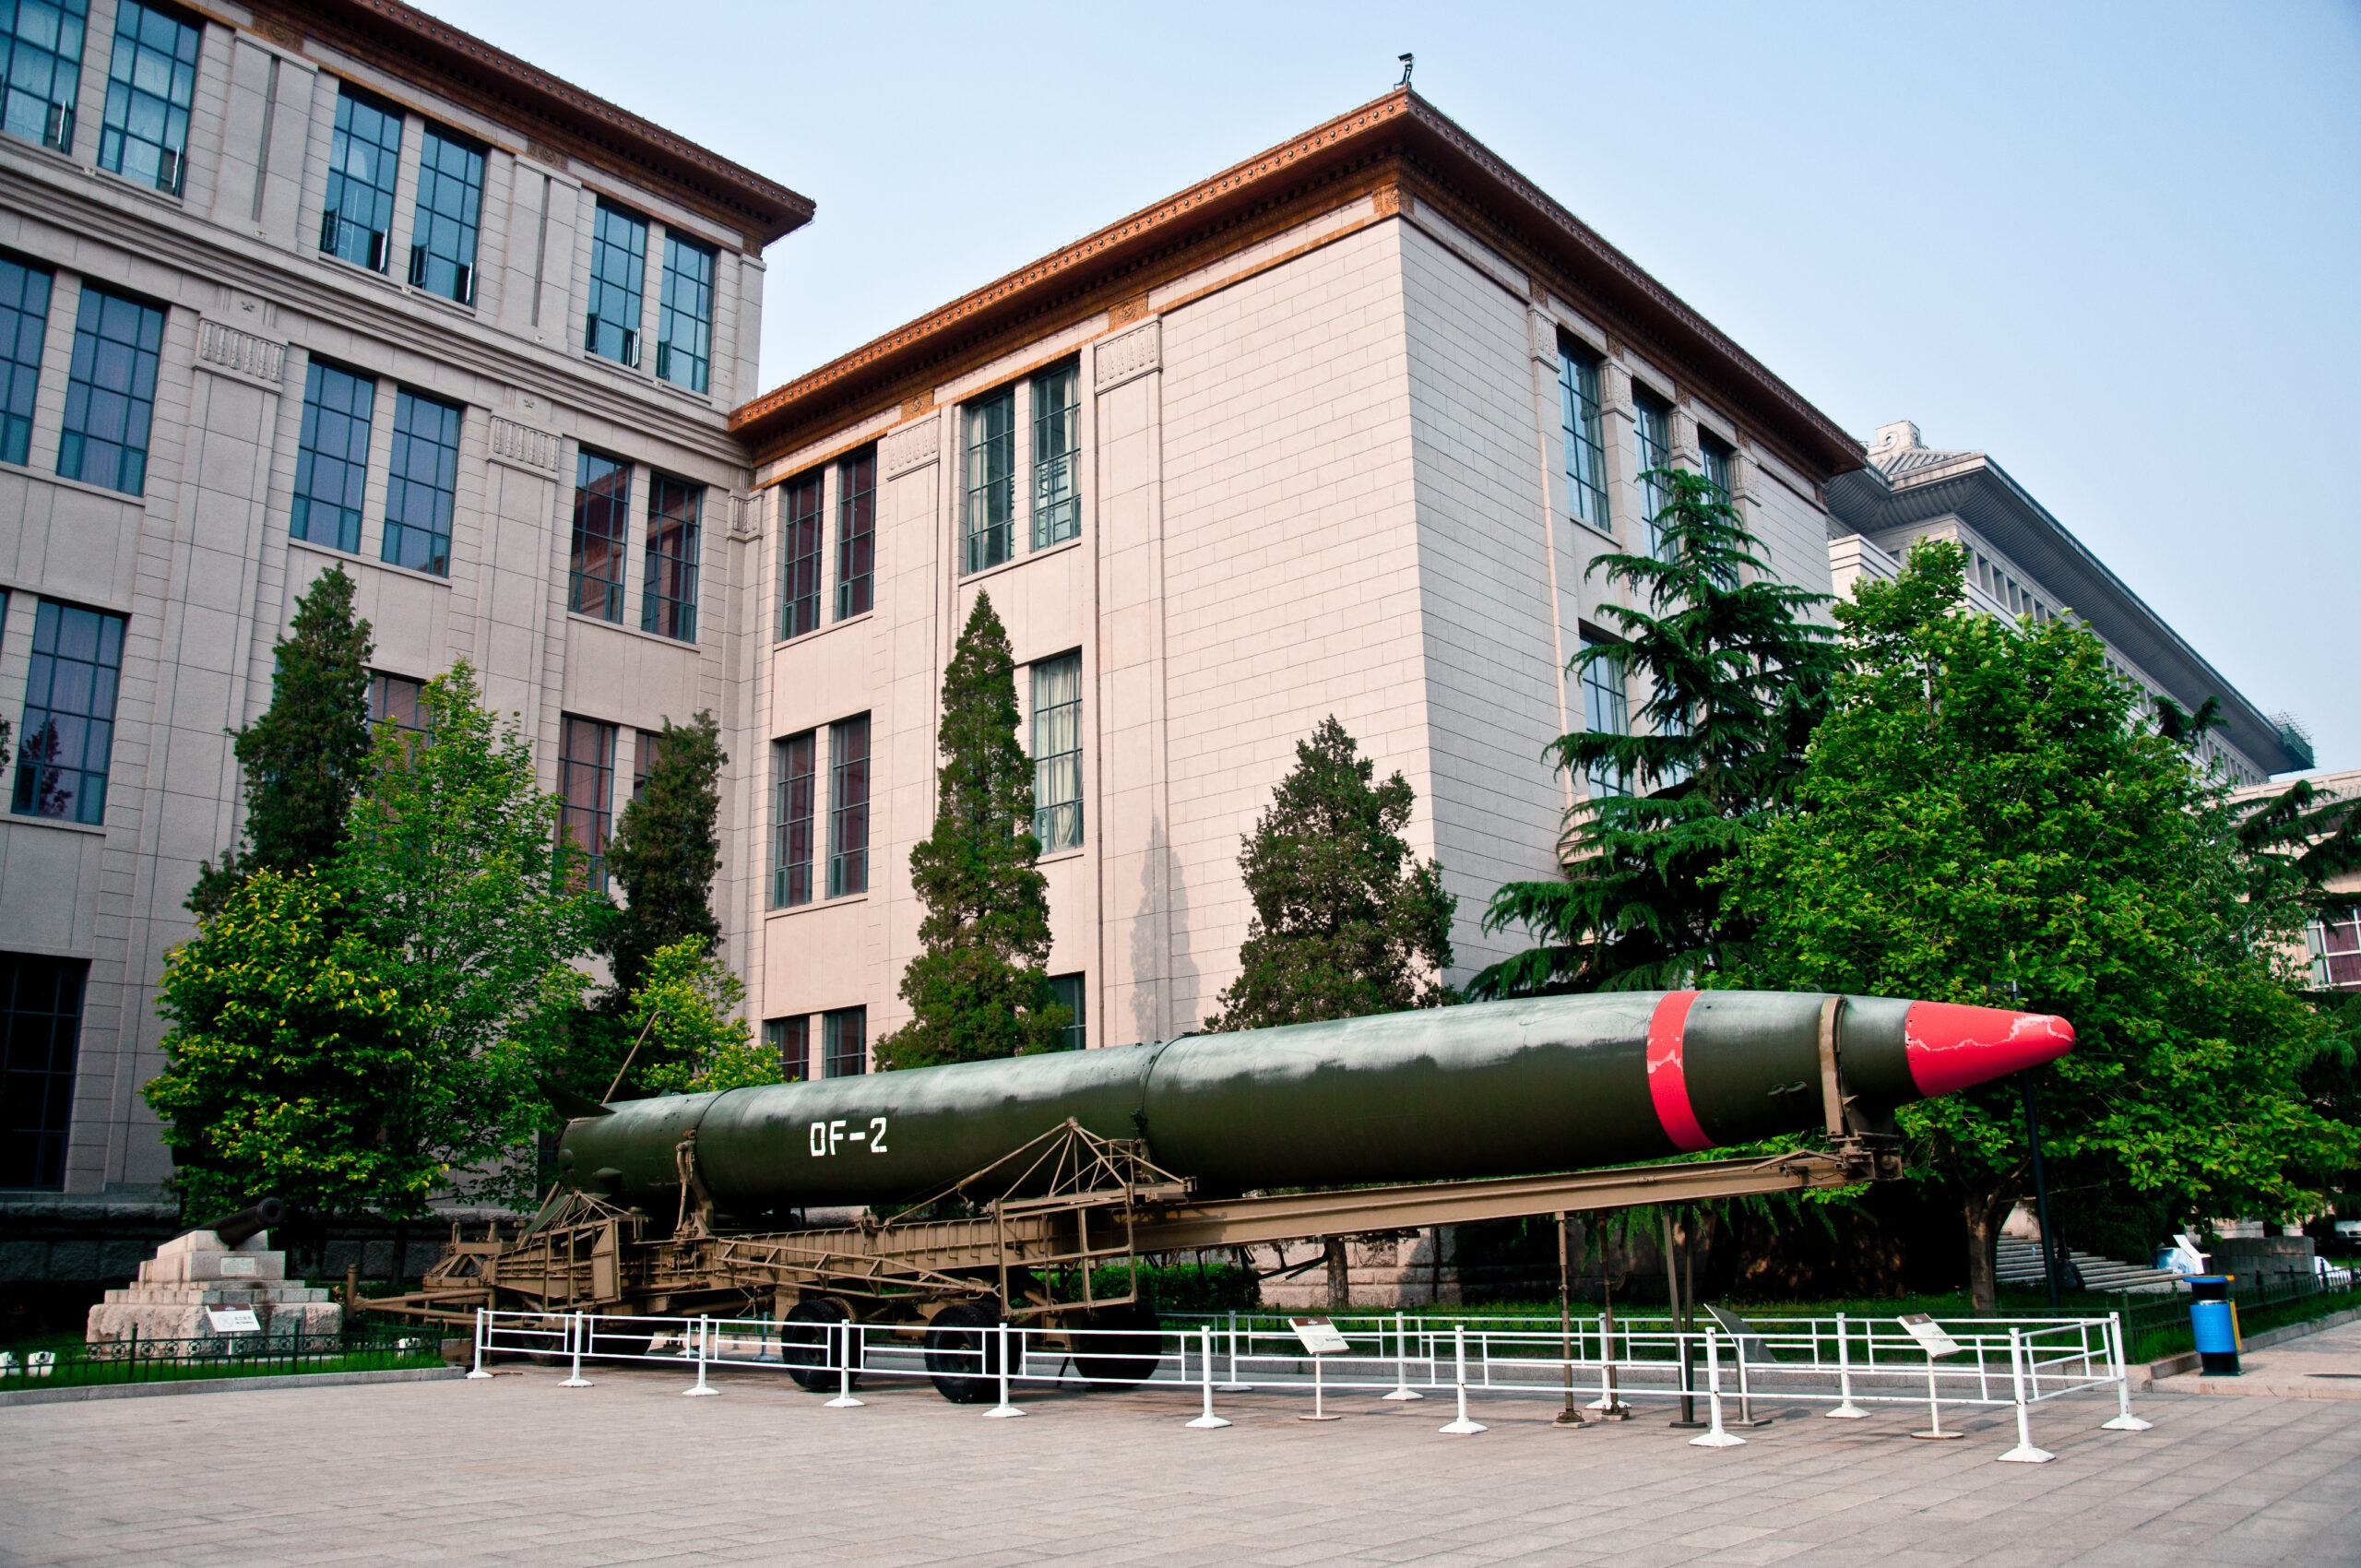 Why Is China Expanding Its Nuclear Arsenal?